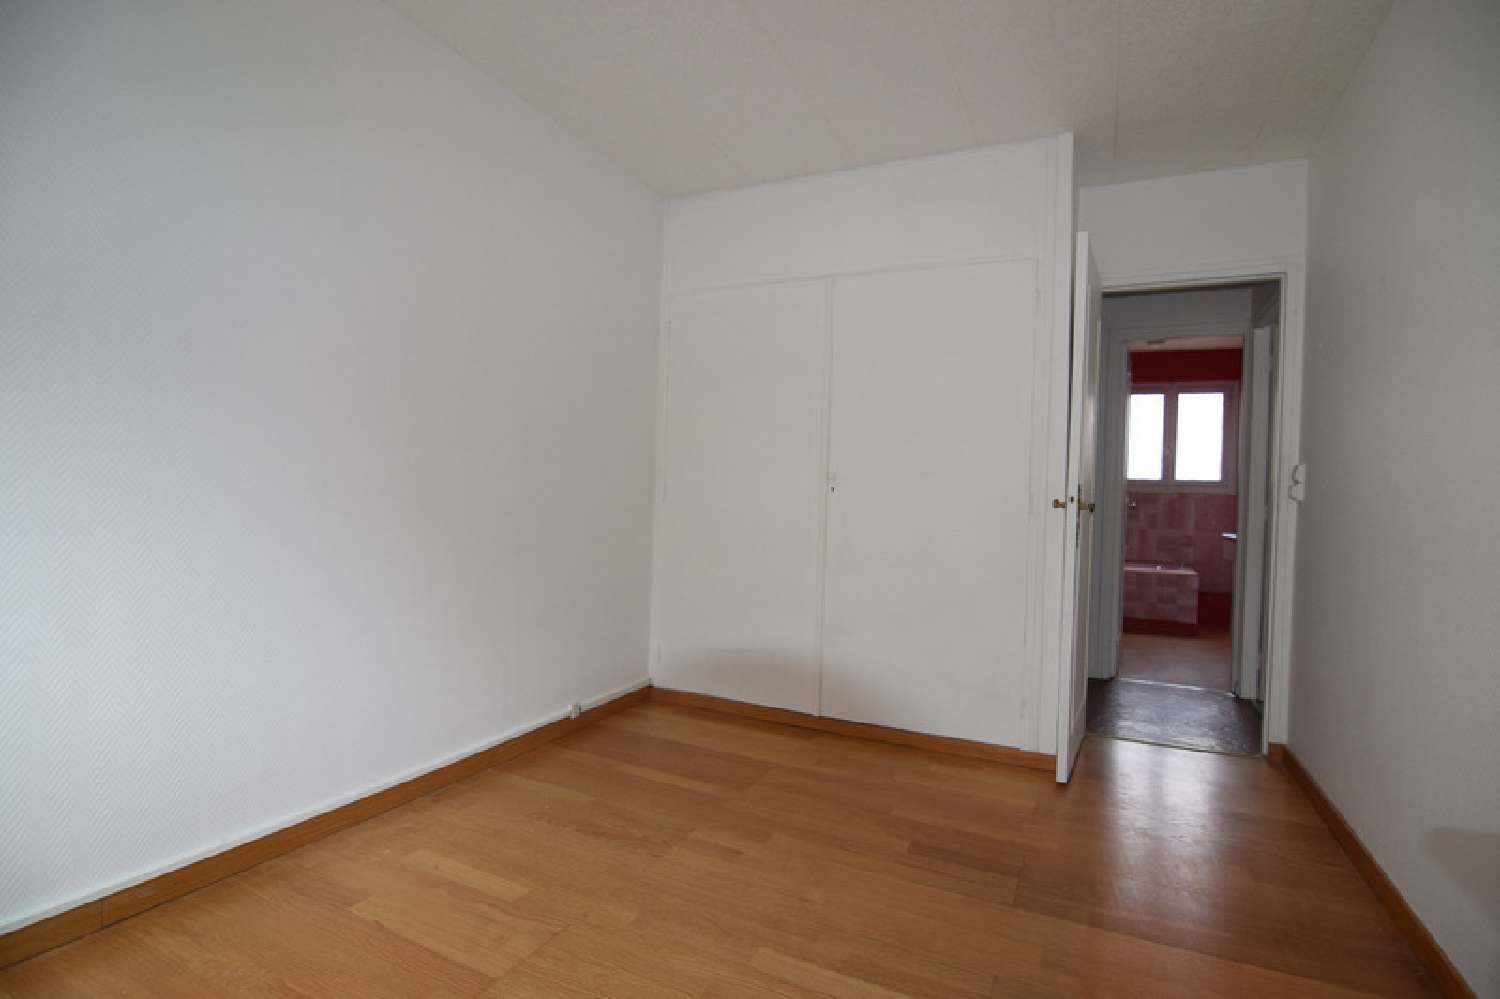  te koop appartement Fâches-Thumesnil Nord 4